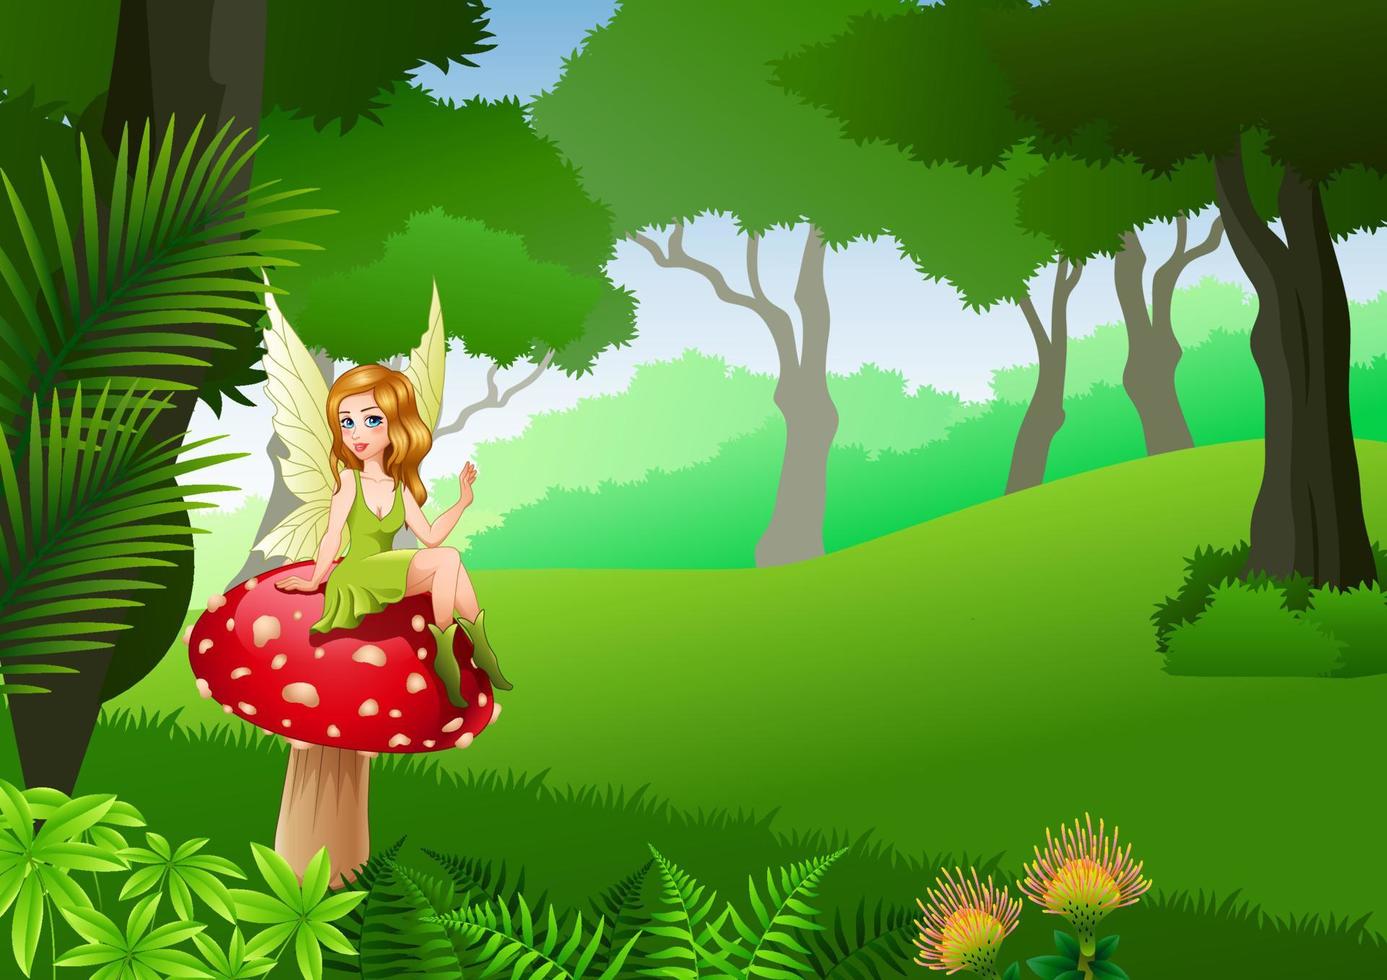 Little fairy sitting on mushroom with Tropical forest background vector